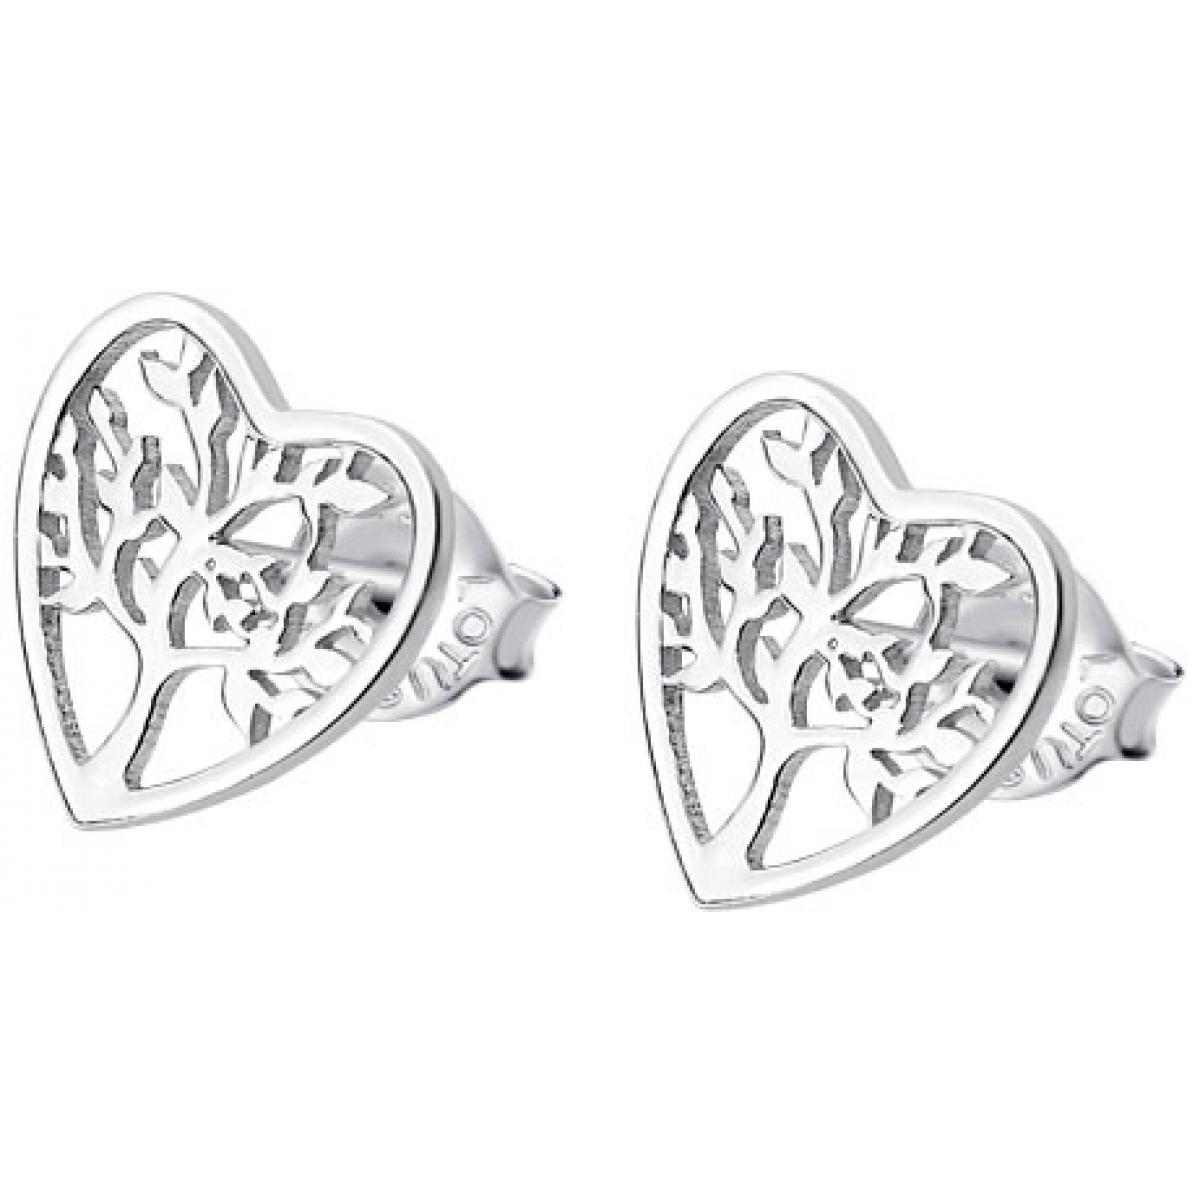 Boucles d'oreilles Lotus Silver TREE OF LIFE LP1769-4-1 - Boucles d'oreilles TREE OF LIFE Argent